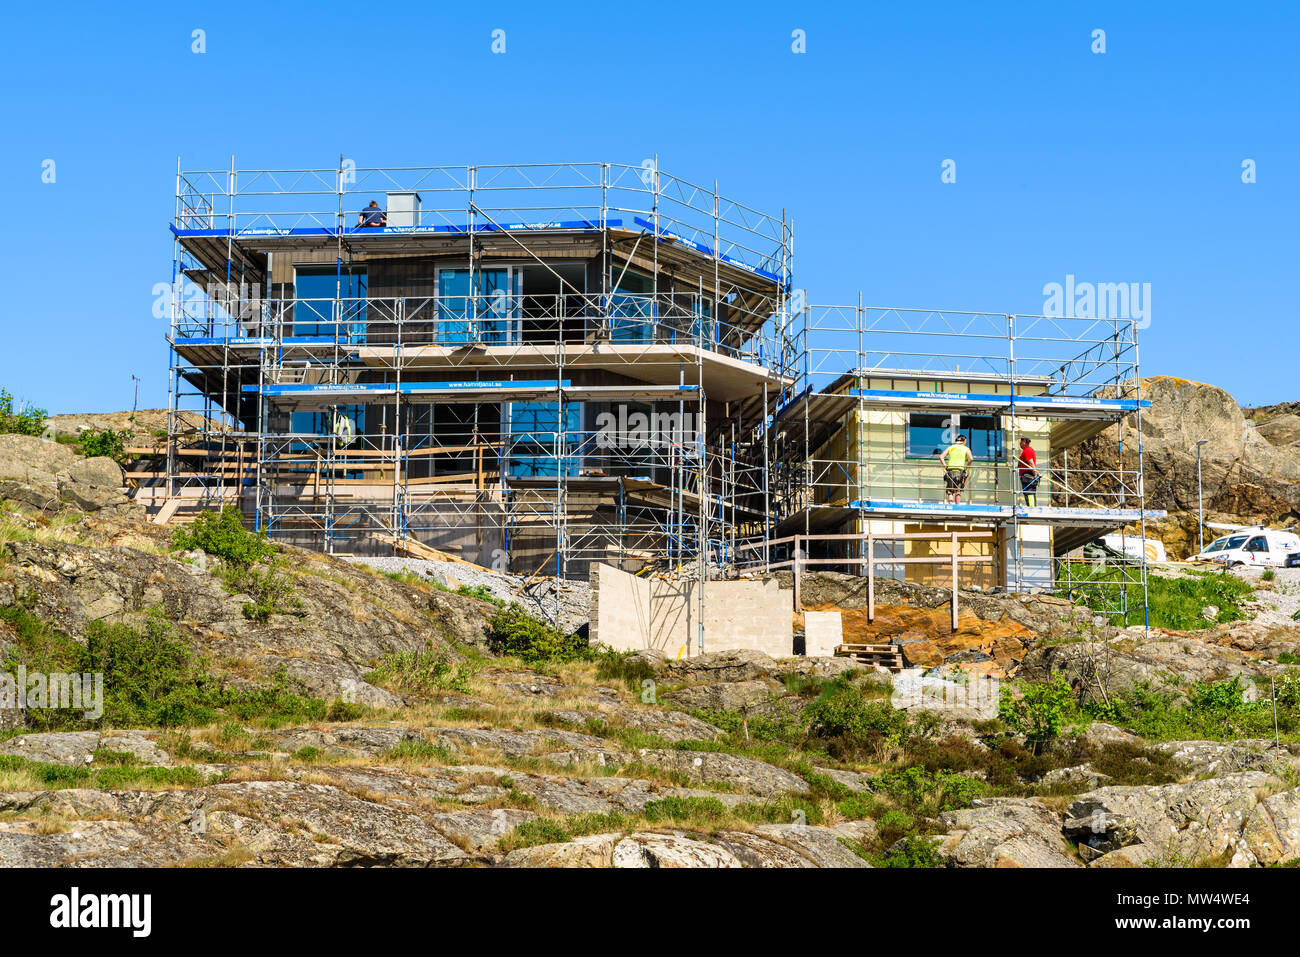 Ronnang, Tjorn, Sweden - May 18, 2018: Travel documentary of everyday life and place. Coastal real estate development is visible everywhere in the reg Stock Photo